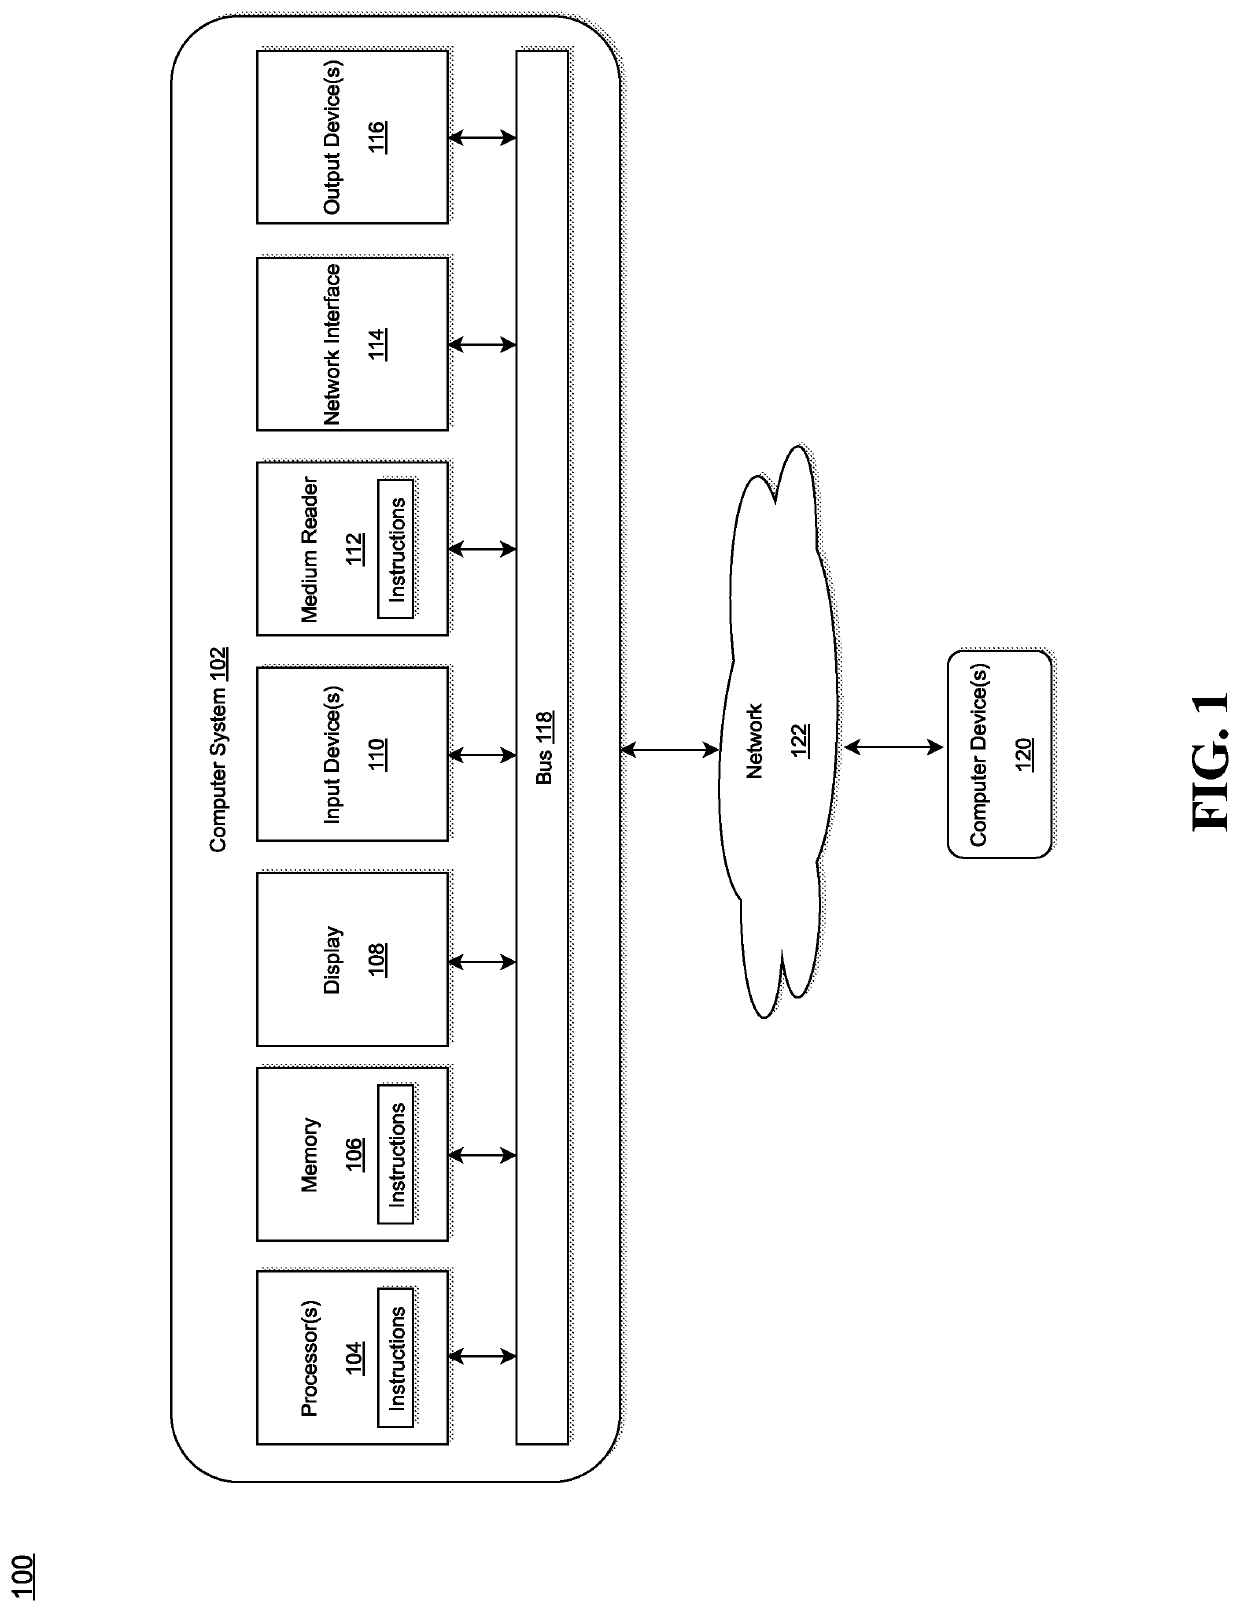 Method and apparatus for implementing an end-to-end api design and development module integrating with firmwide tools and processes